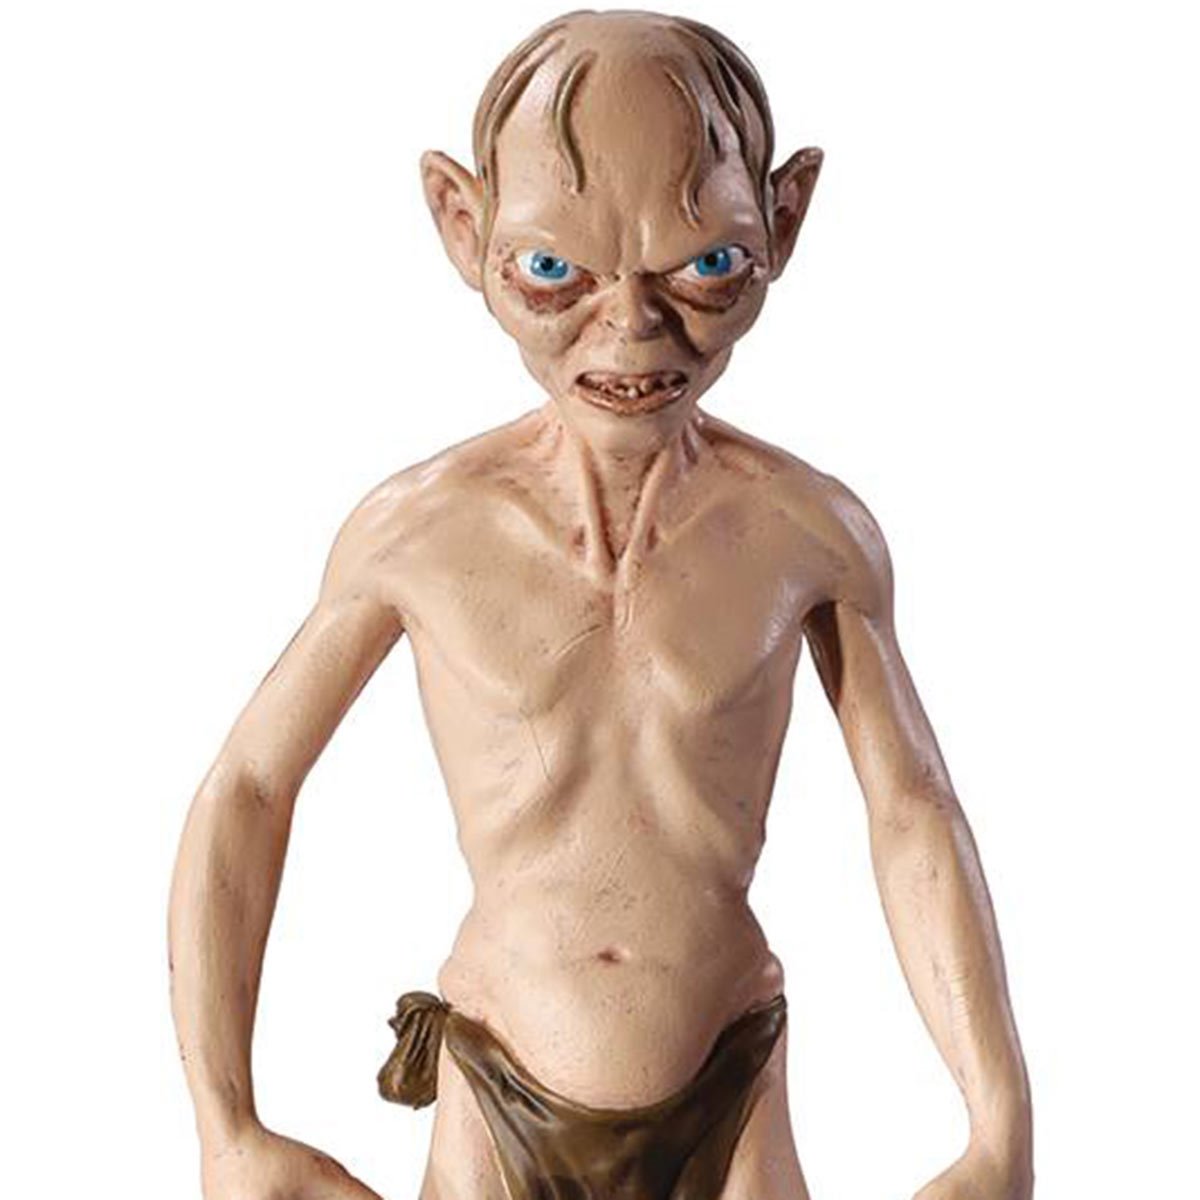 Buy cheap The Lord of the Rings: Gollum cd key - lowest price